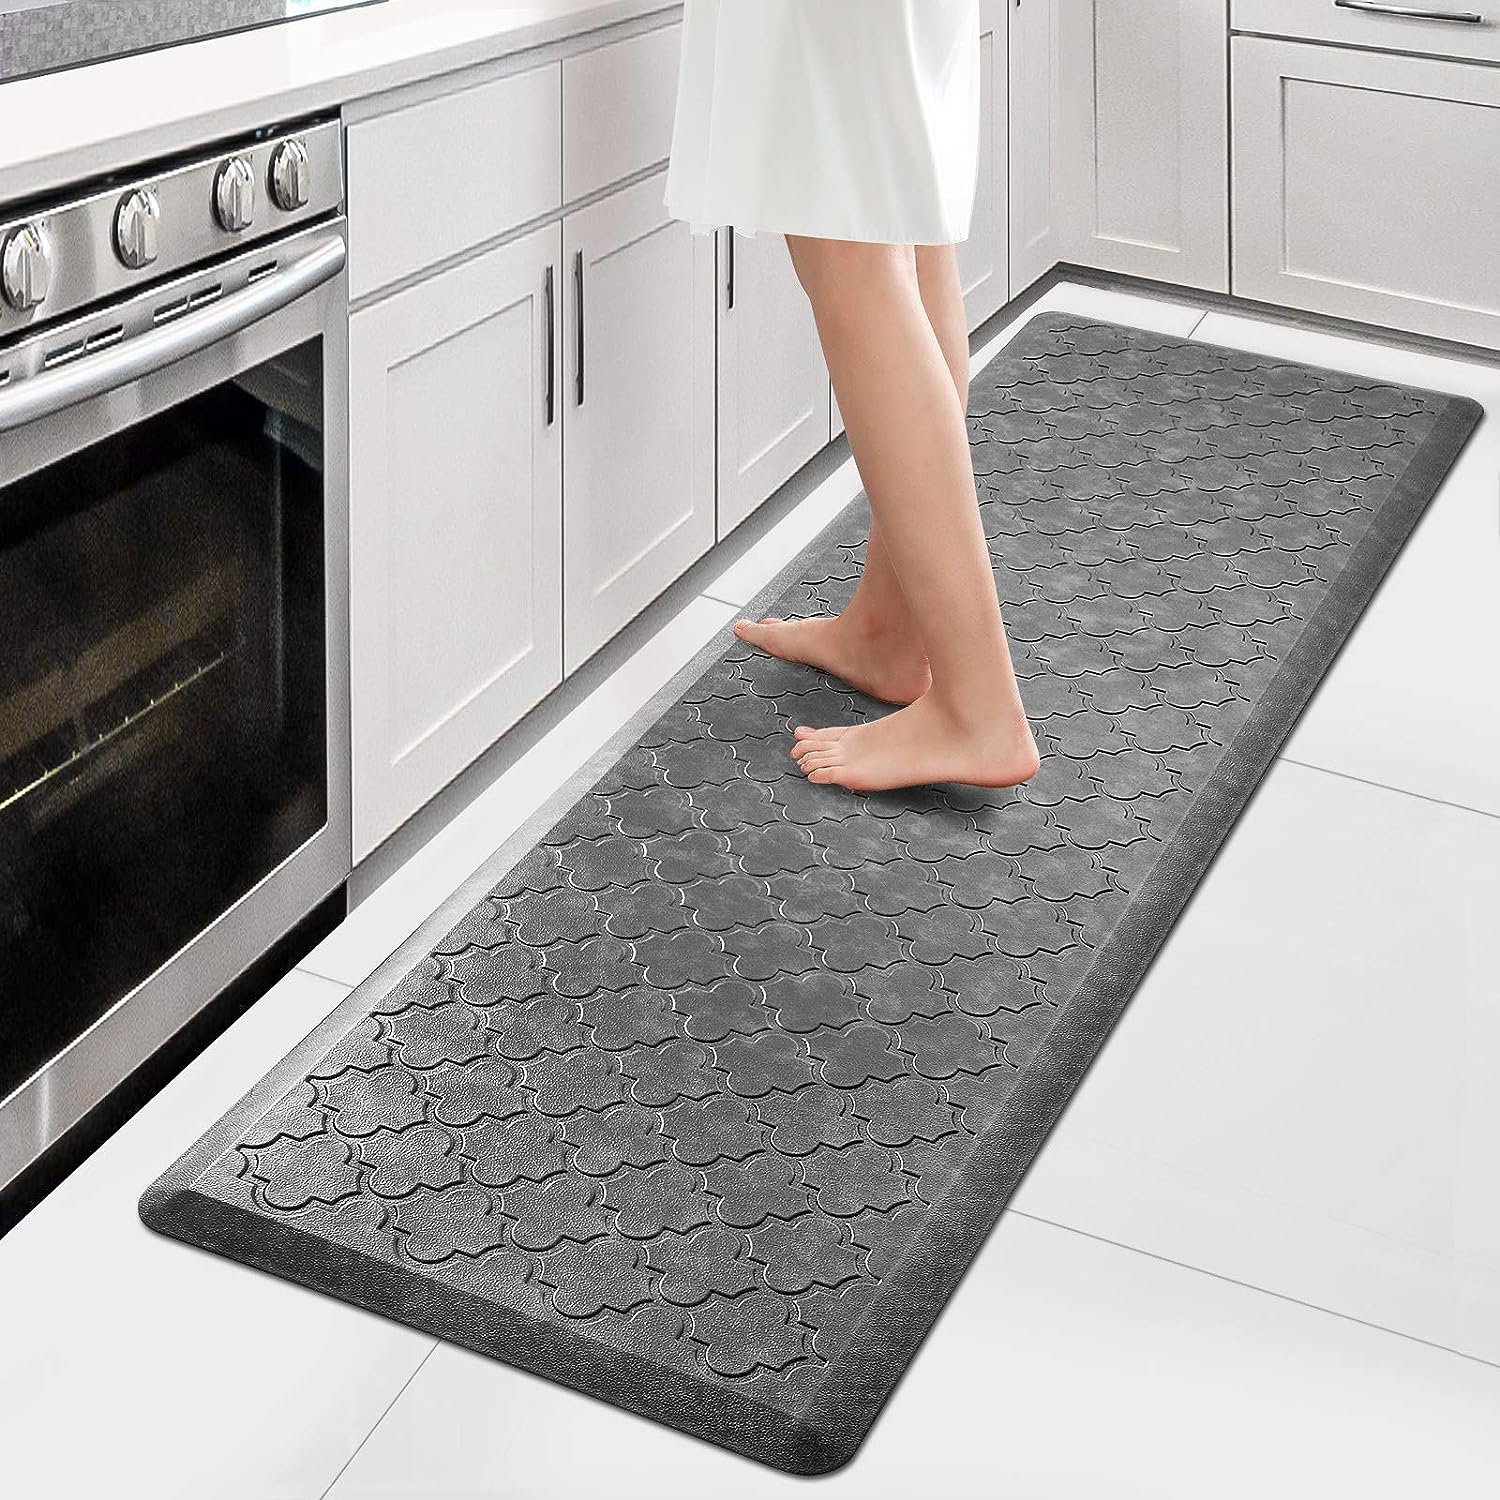 WISELIFE Kitchen Mat Cushioned Anti Fatigue Floor [...]